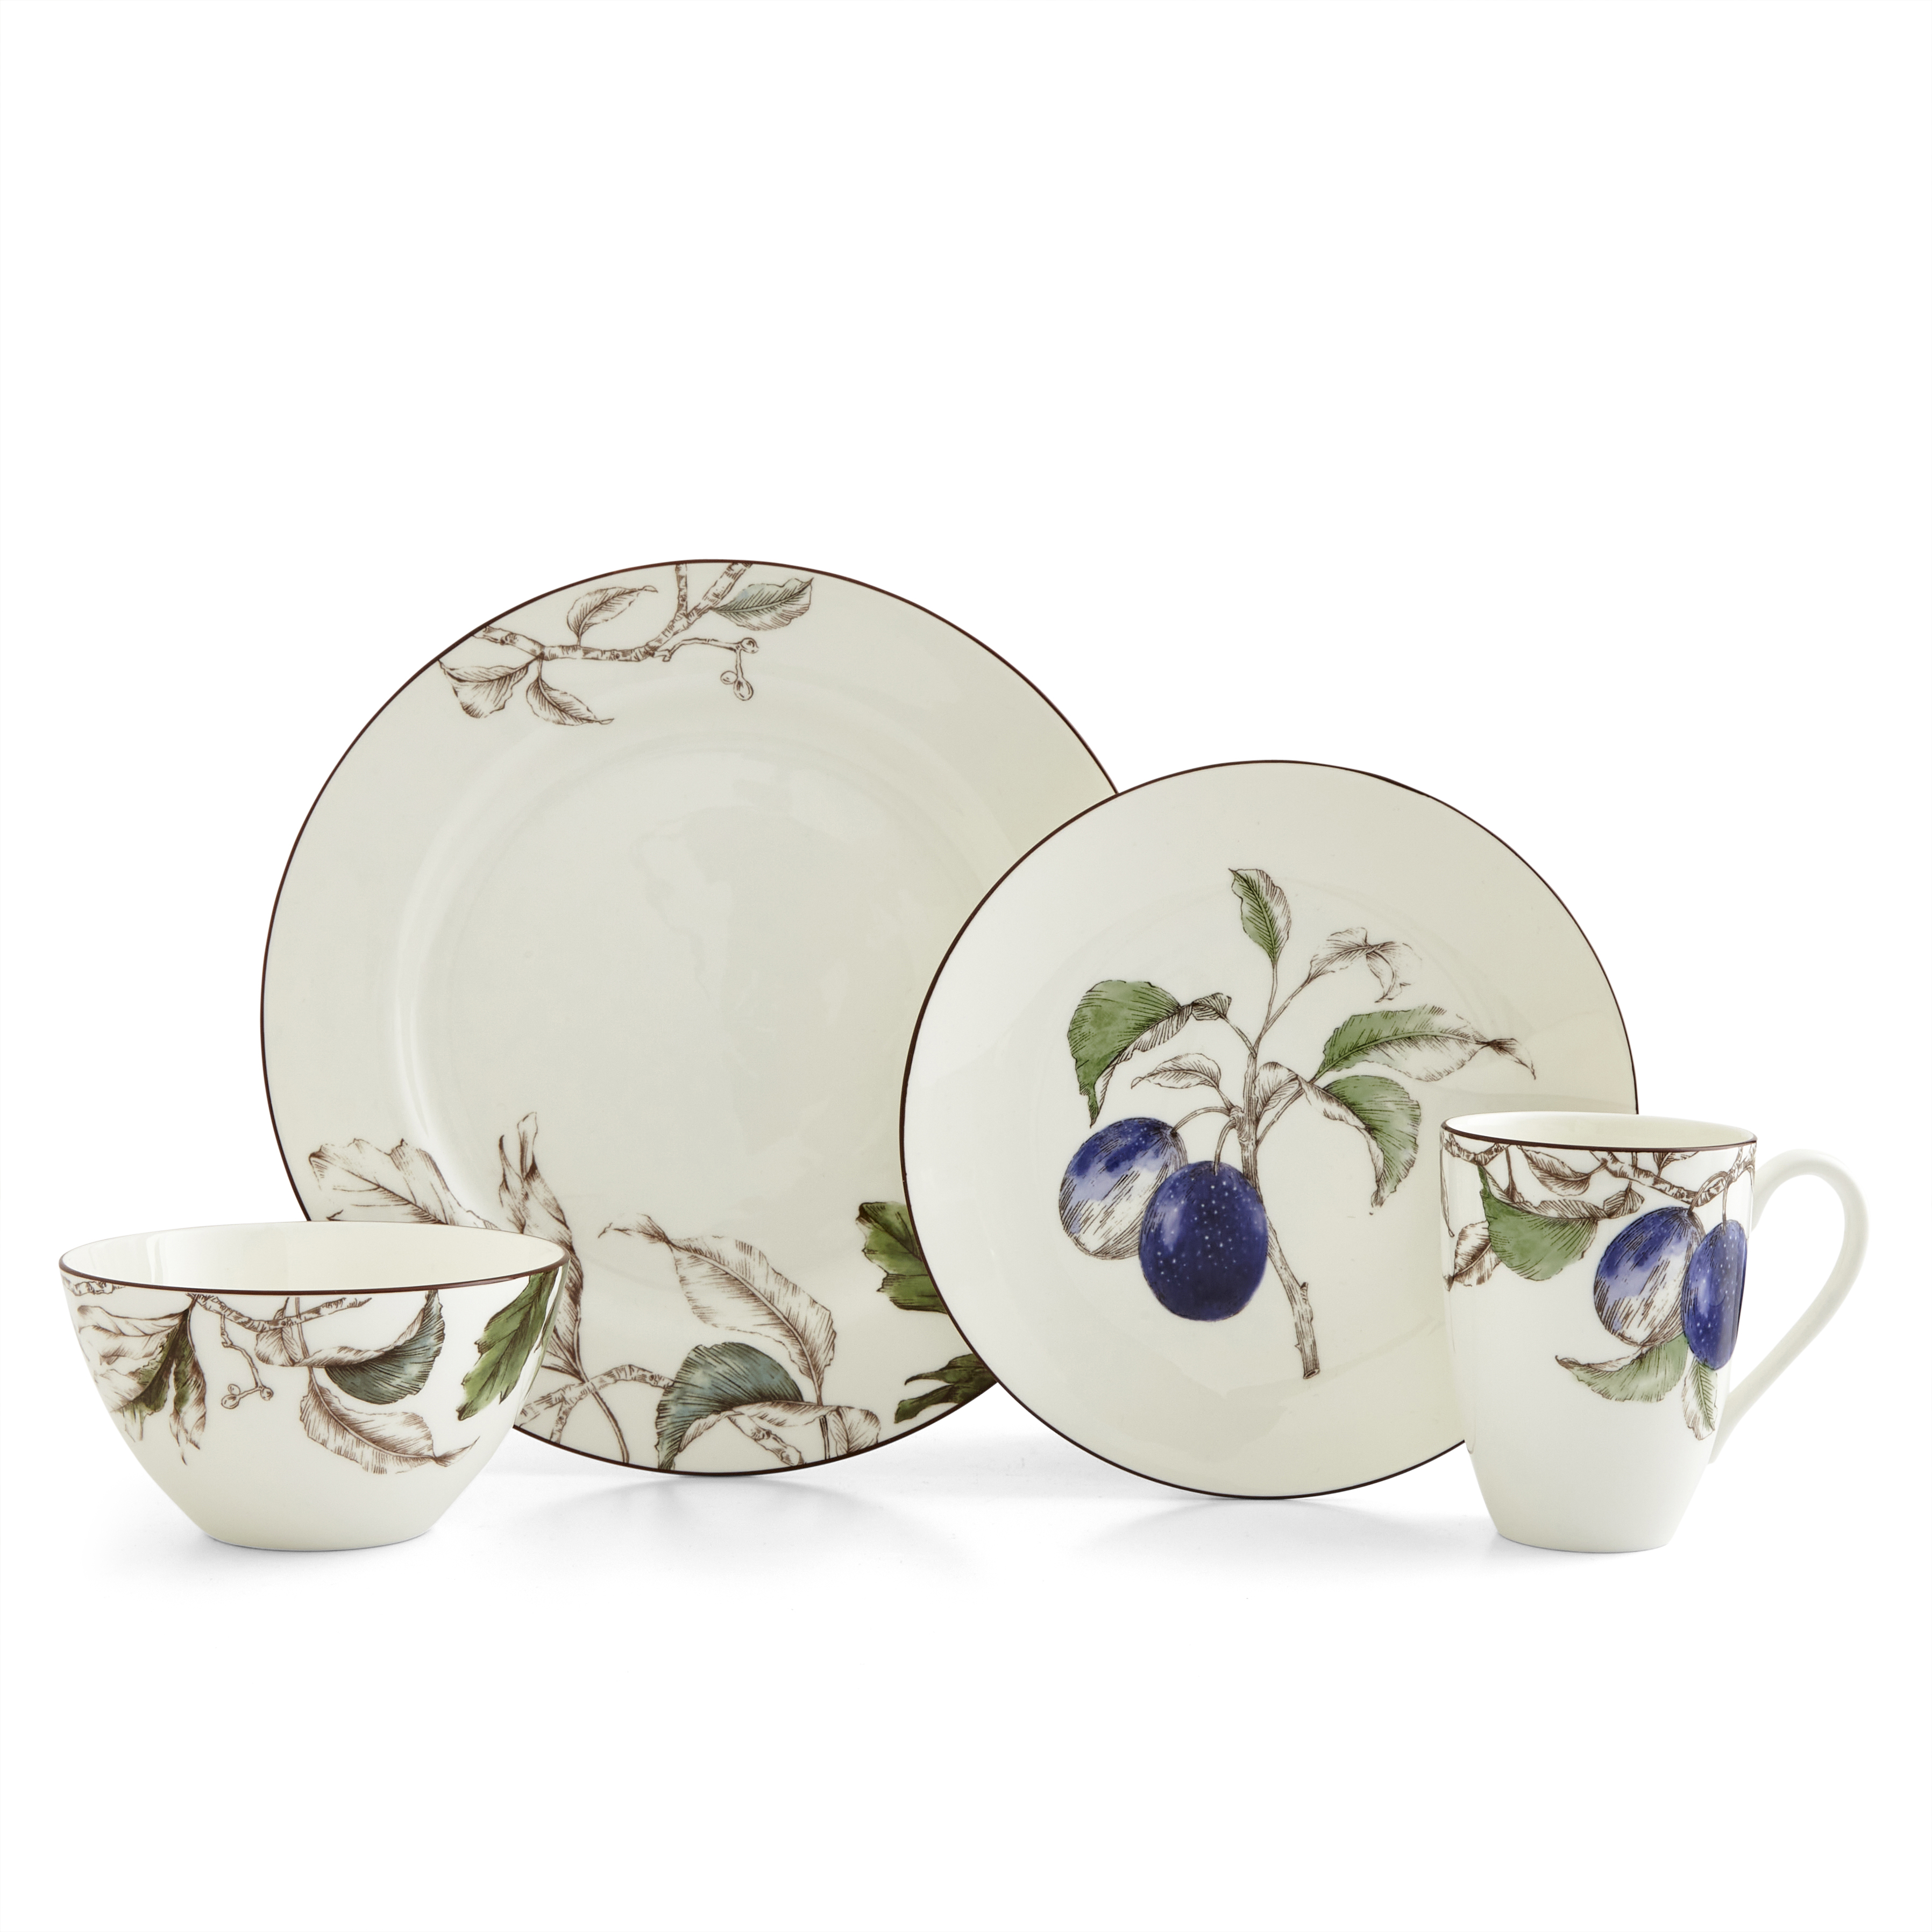 Nature's Bounty 4 Piece Place Setting, Plum image number null